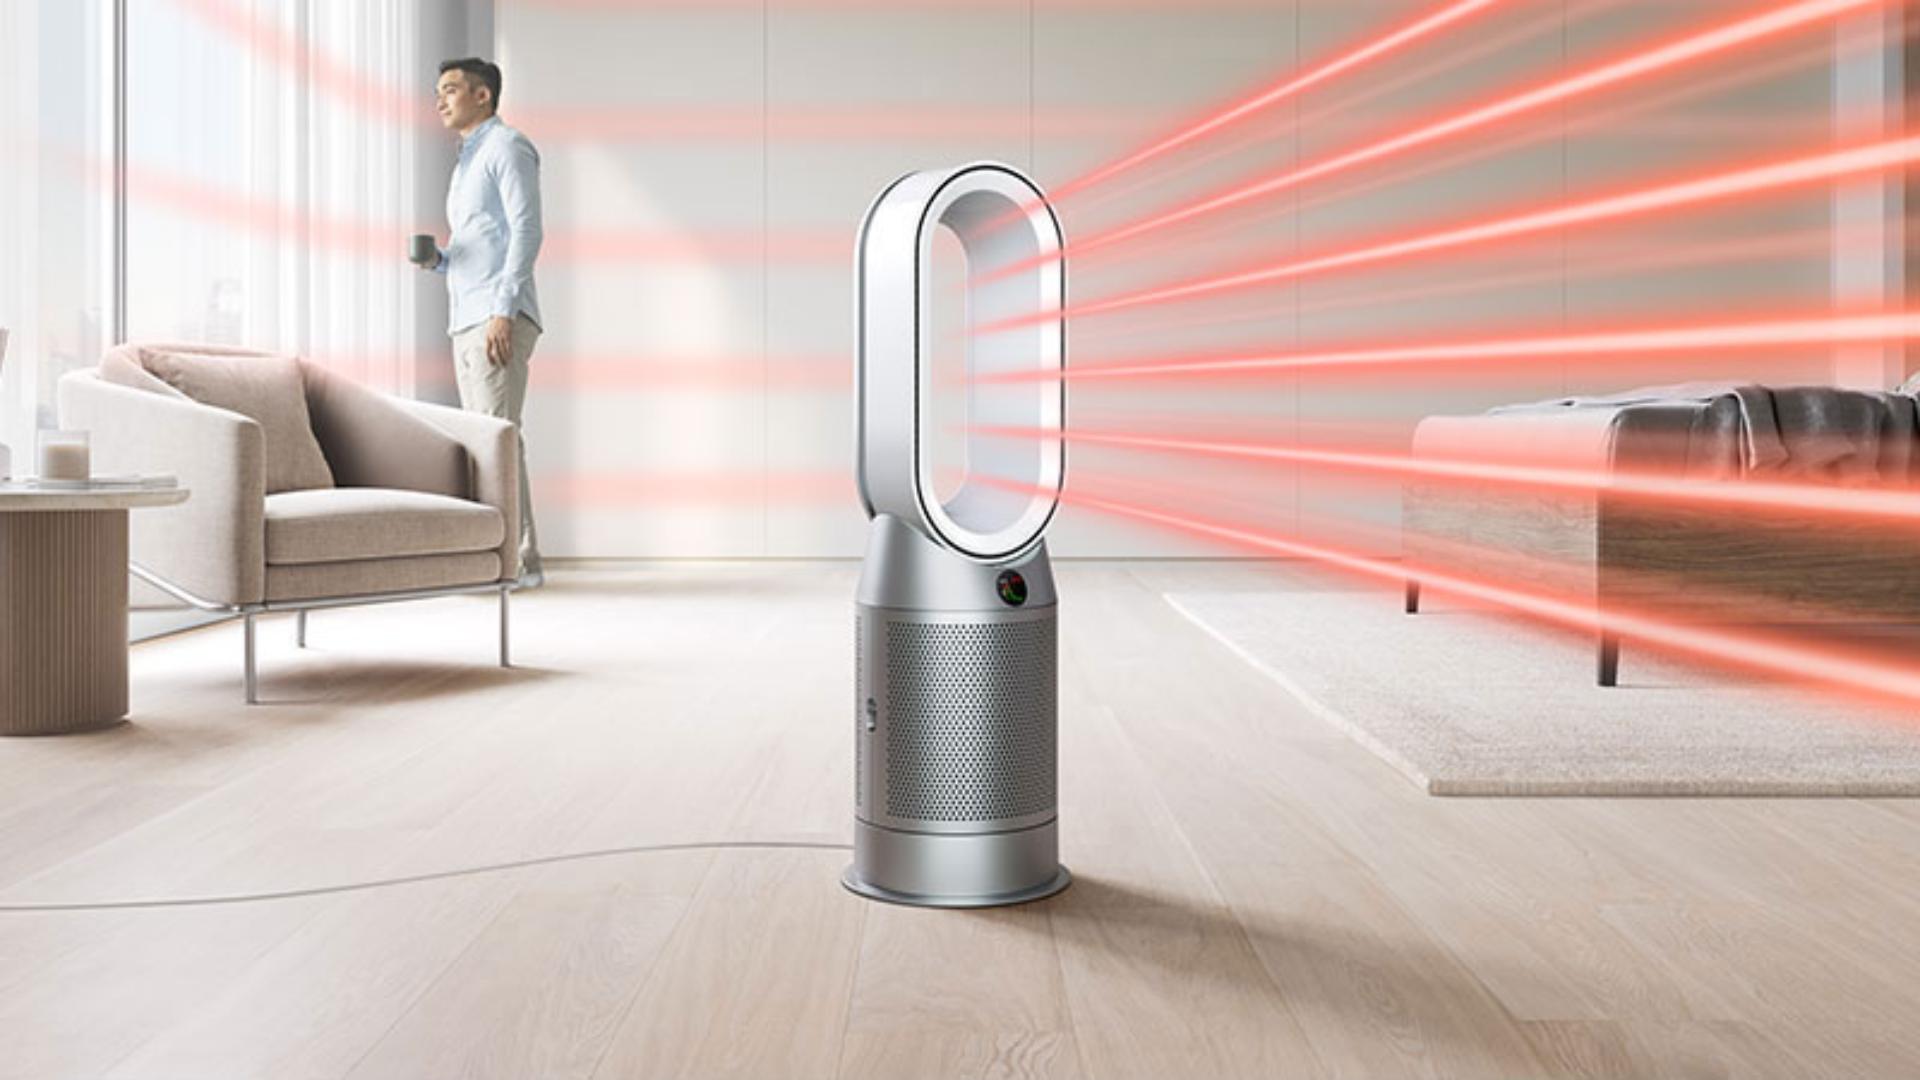 Dyson Purifier Cool projecting purified air